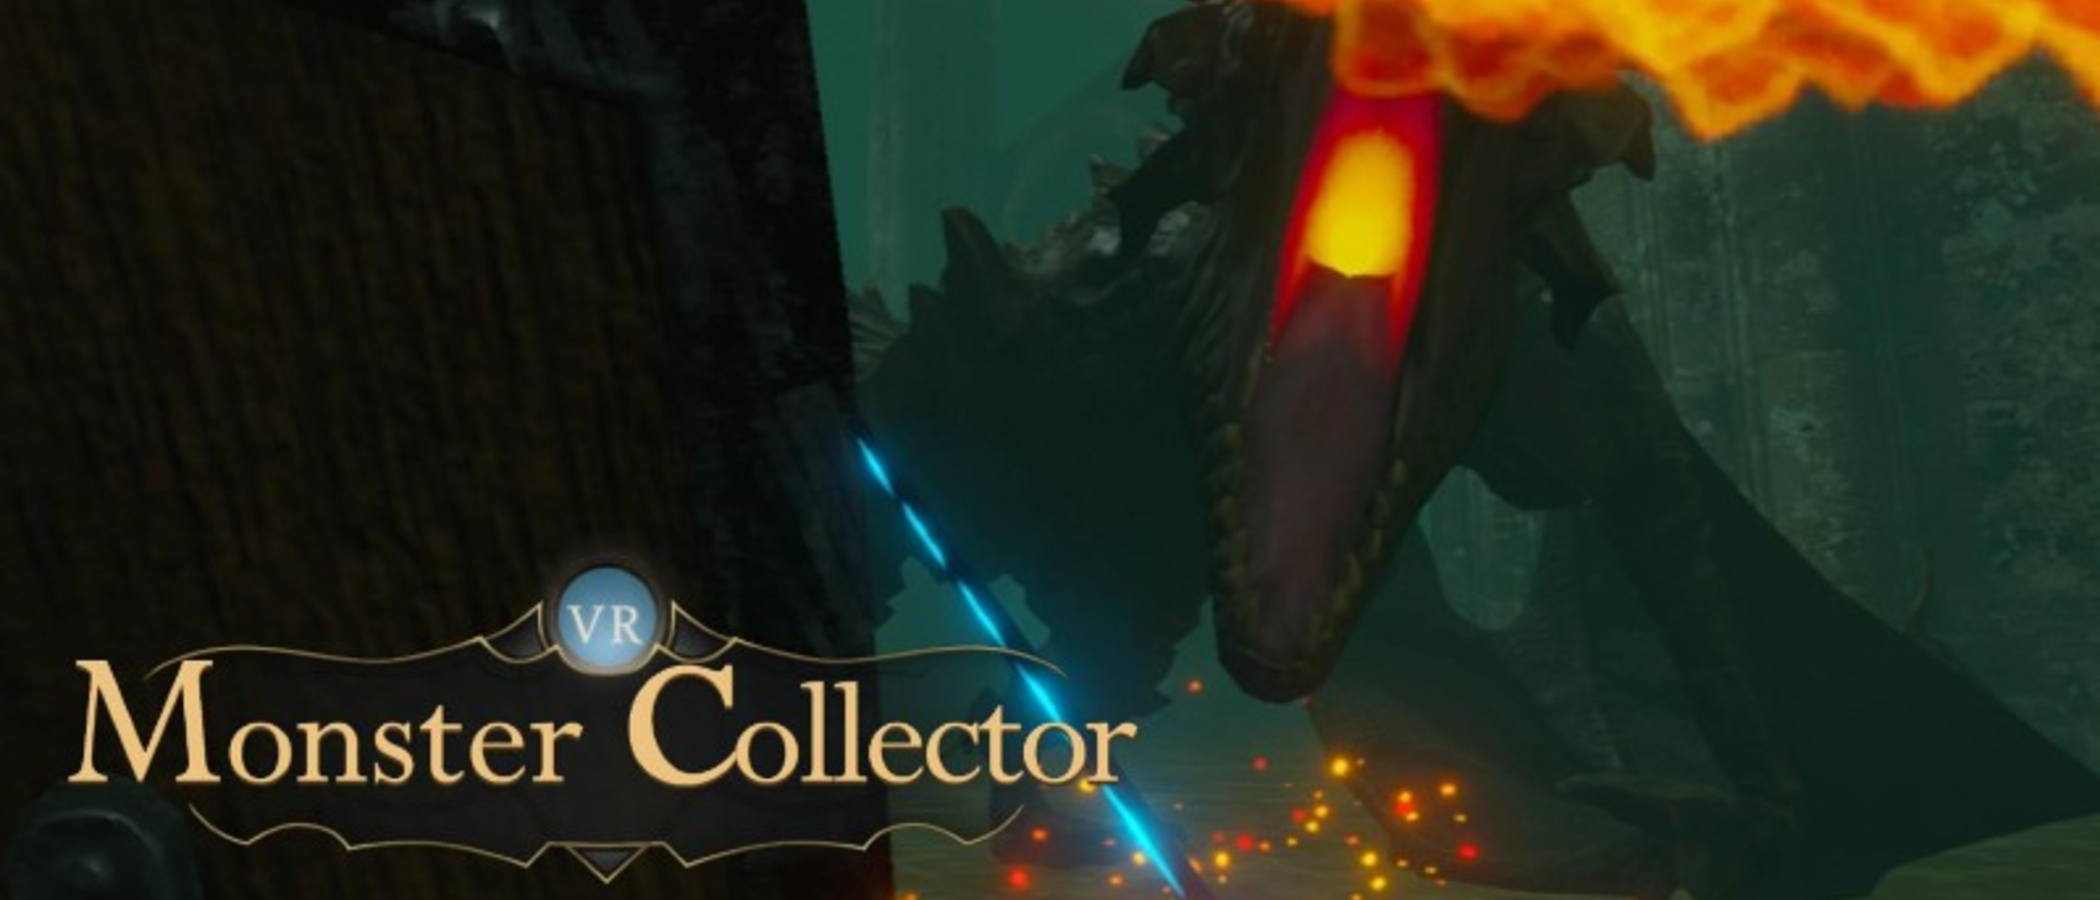 Monster Collector VR Demo